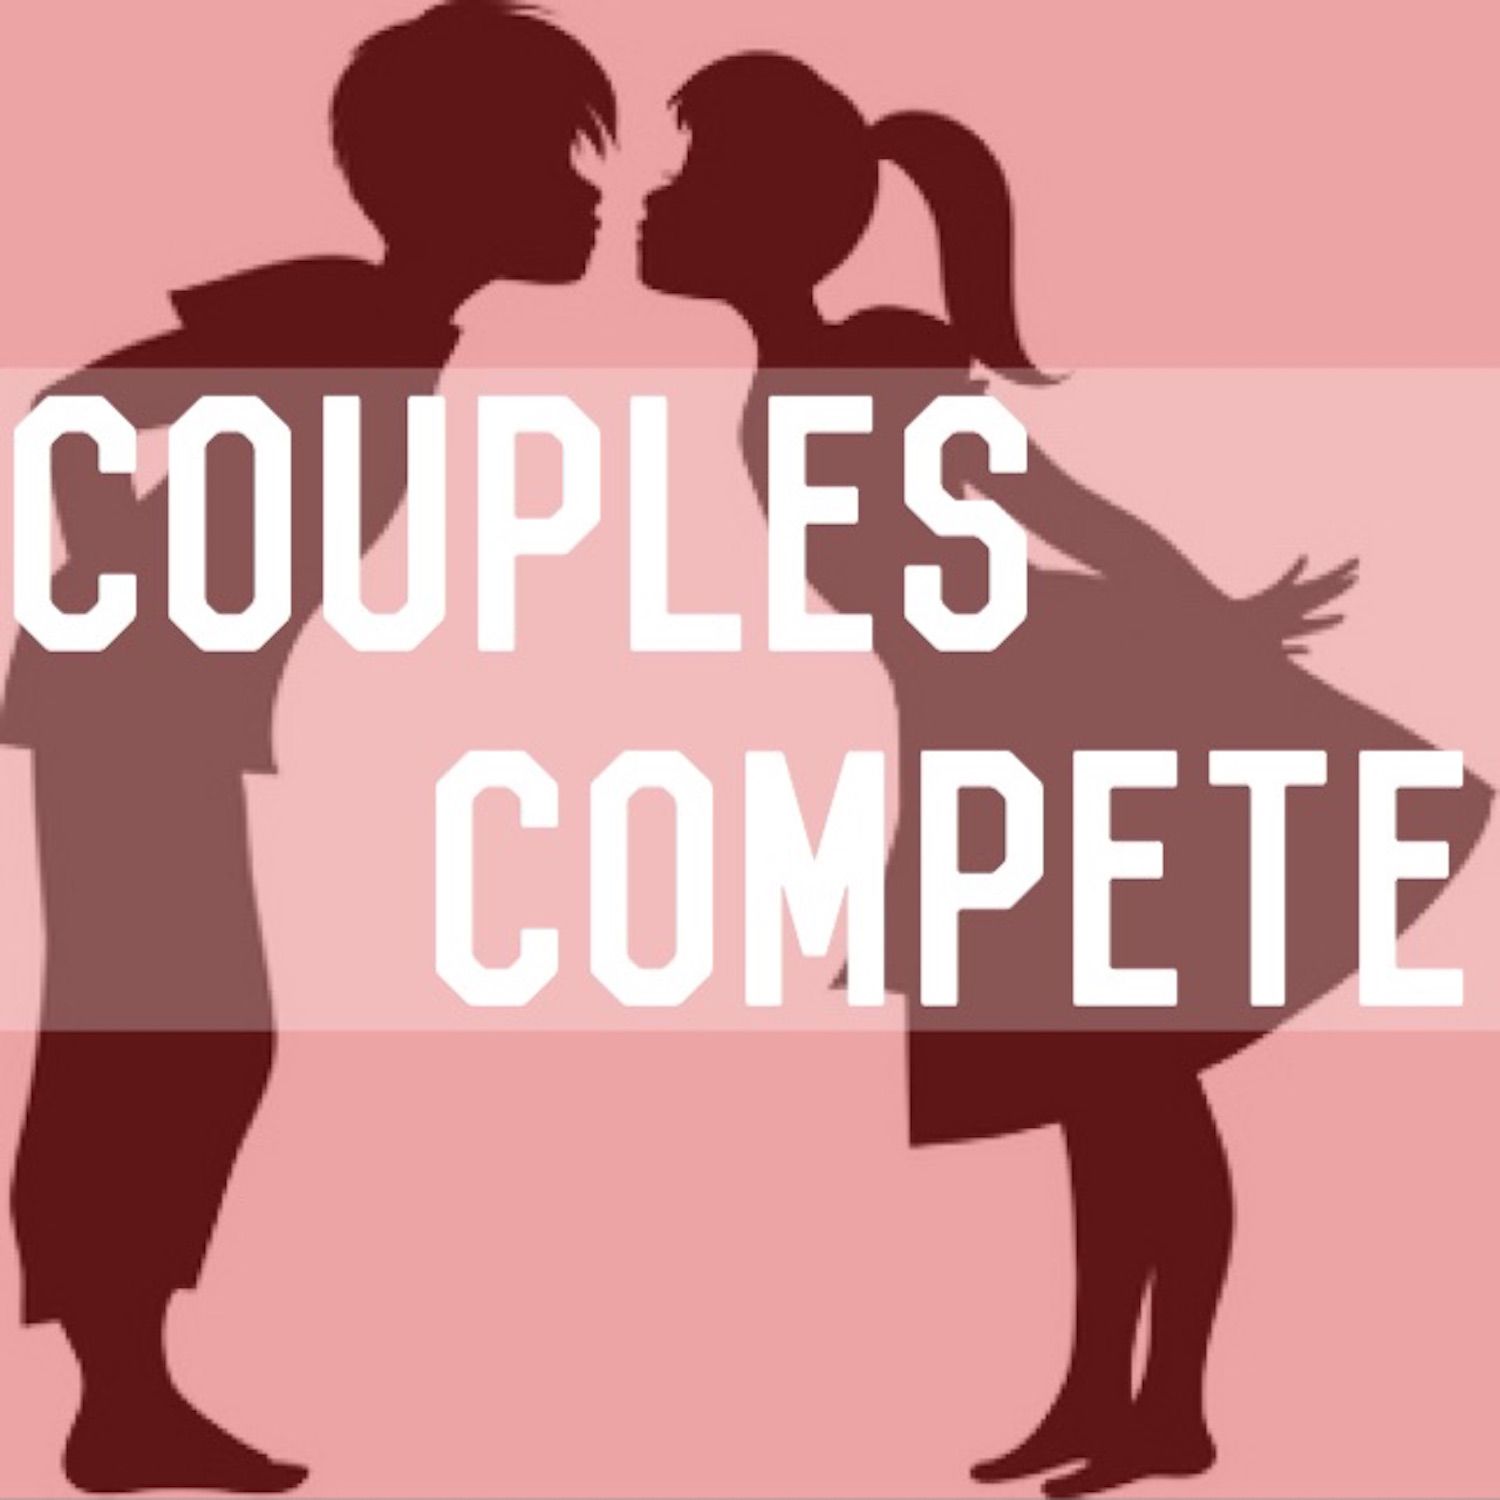 Couples Compete